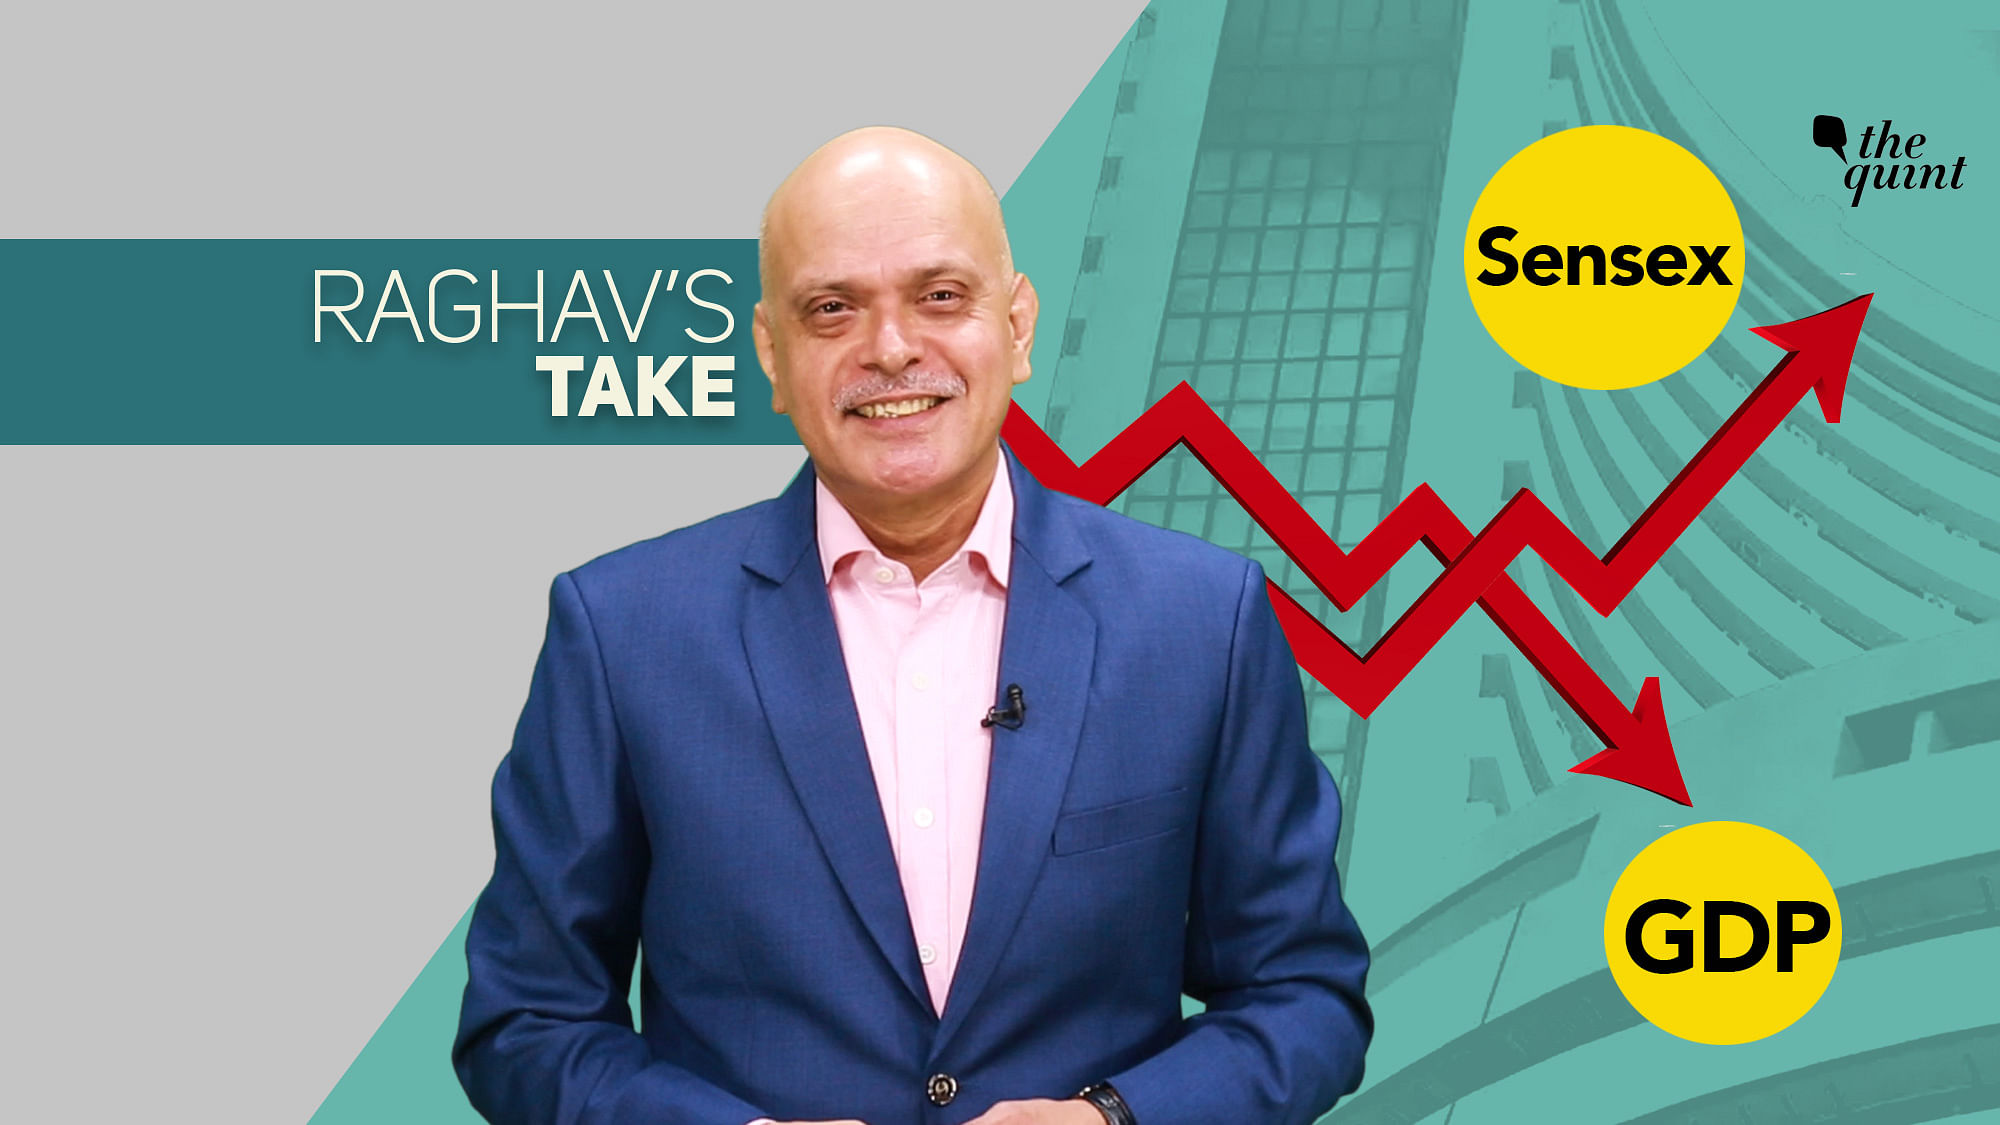 Raghav Bahl explains why the markets are at a record high, while key sectors are reeling in pessimism.